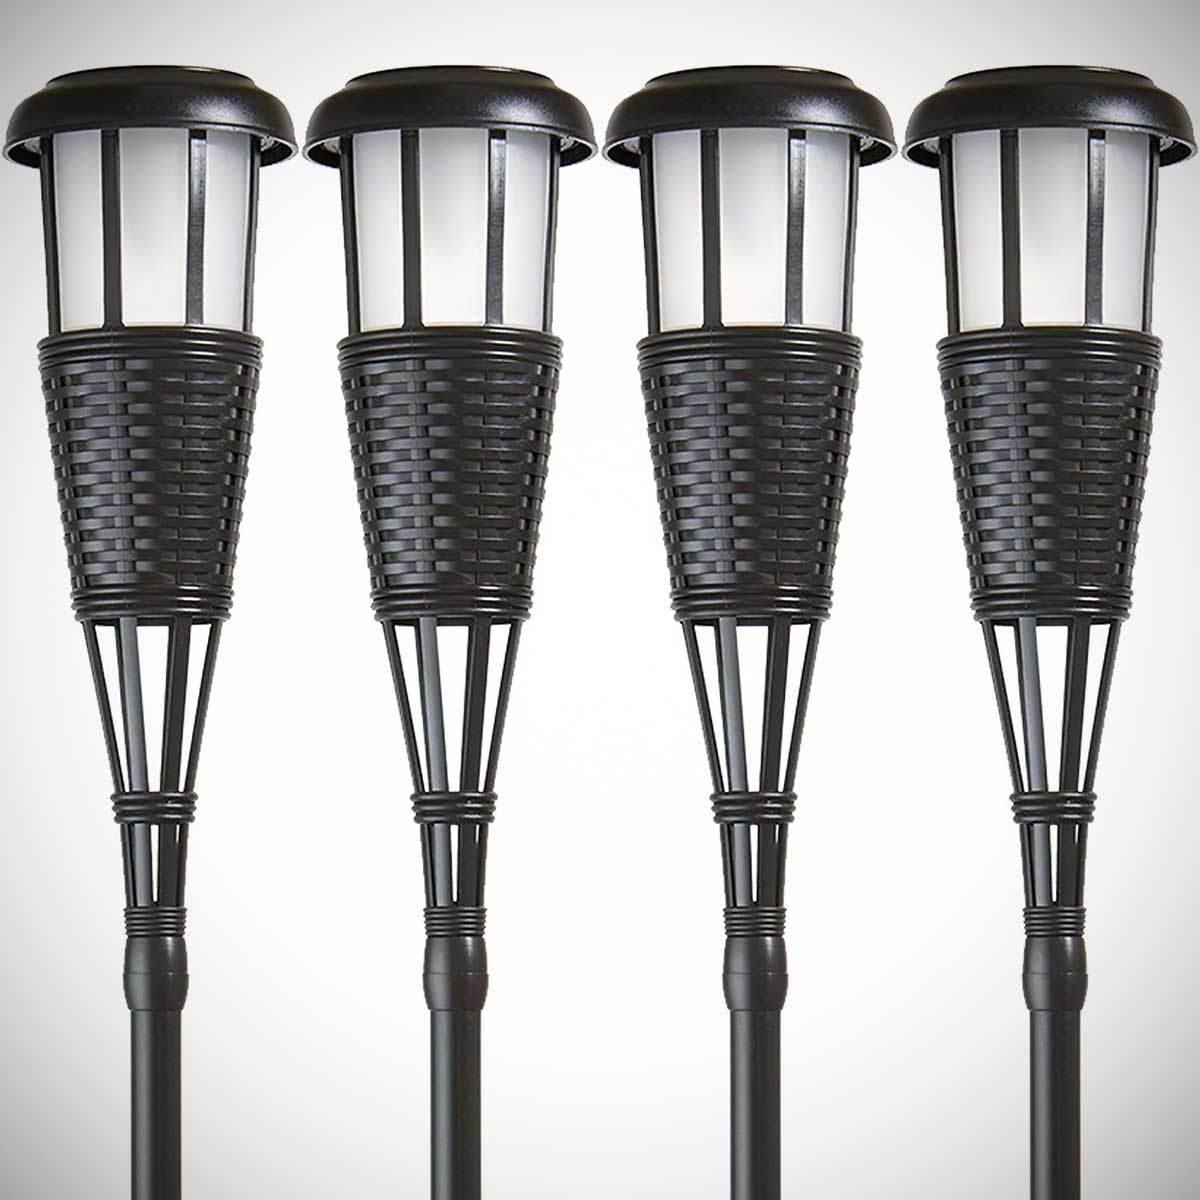 Newhouse Lighting Solar LED Torches